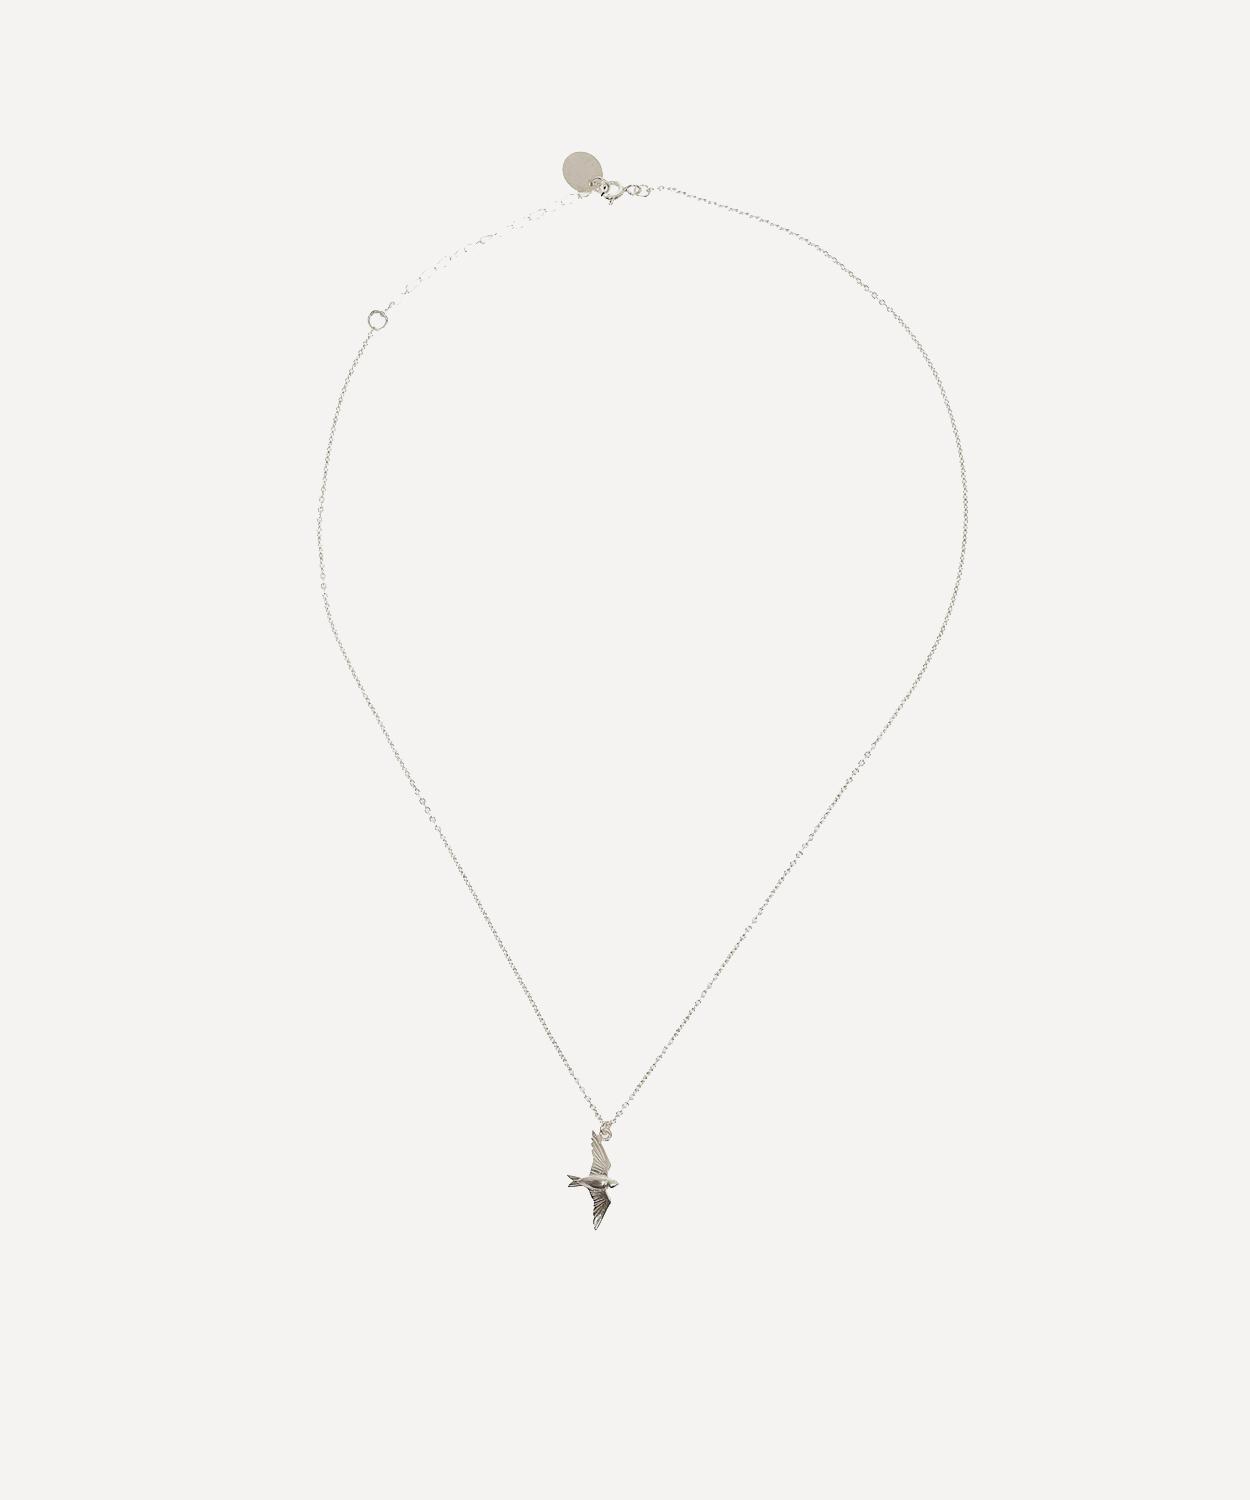 Silver Flying Swallow Necklace | Liberty London